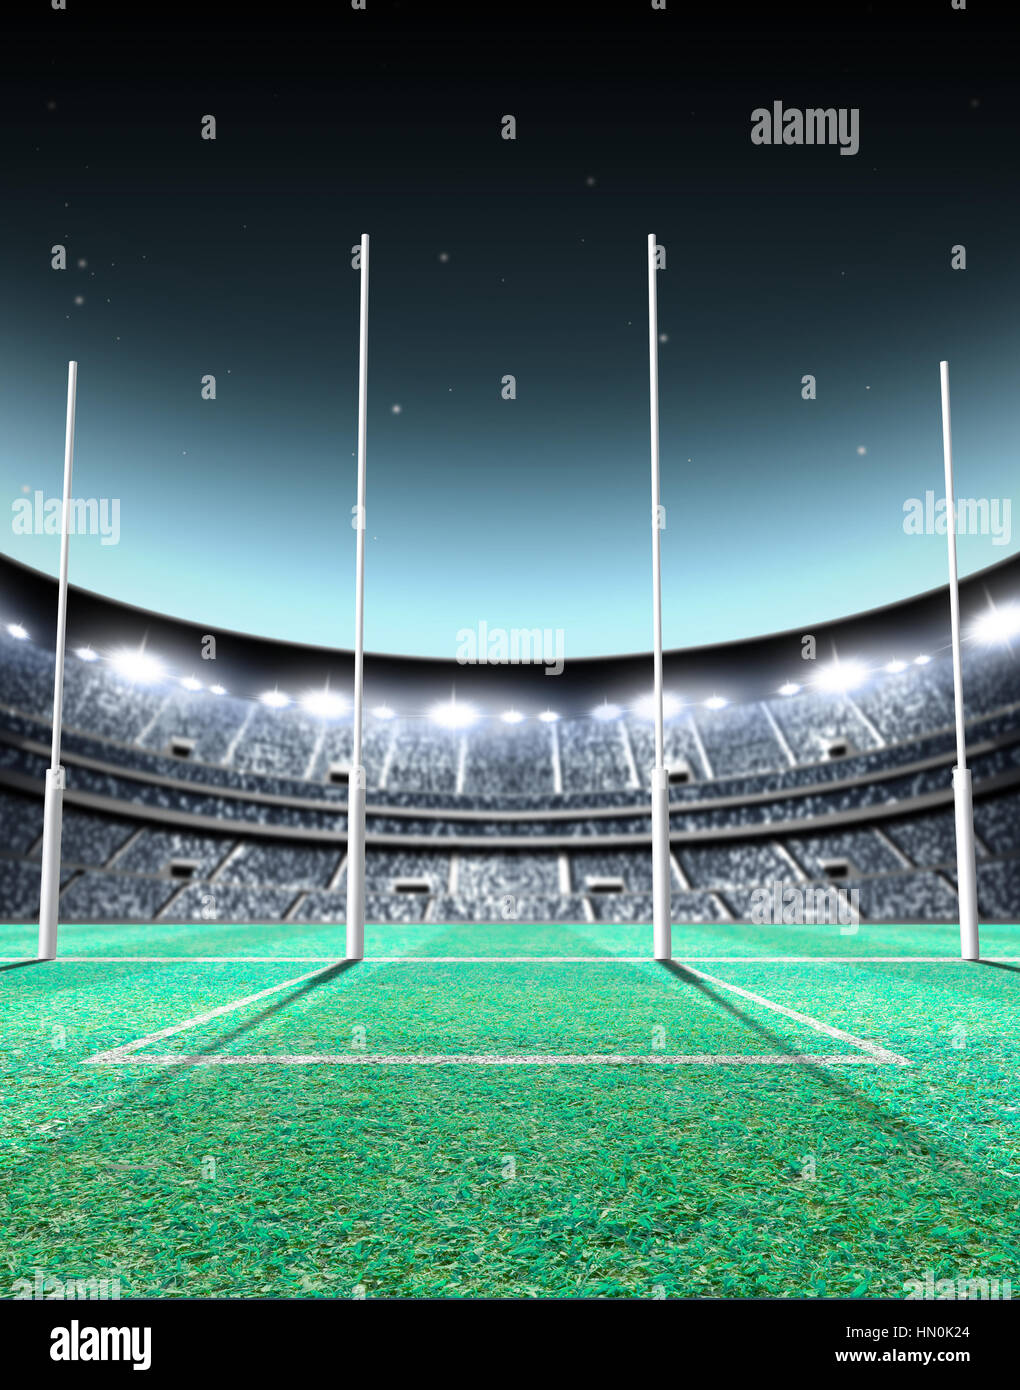 A generic seated aussie rules stadium showing goal posts on a green grass pitch at night under illuminated floodlights - 3D Stock Photo - Alamy